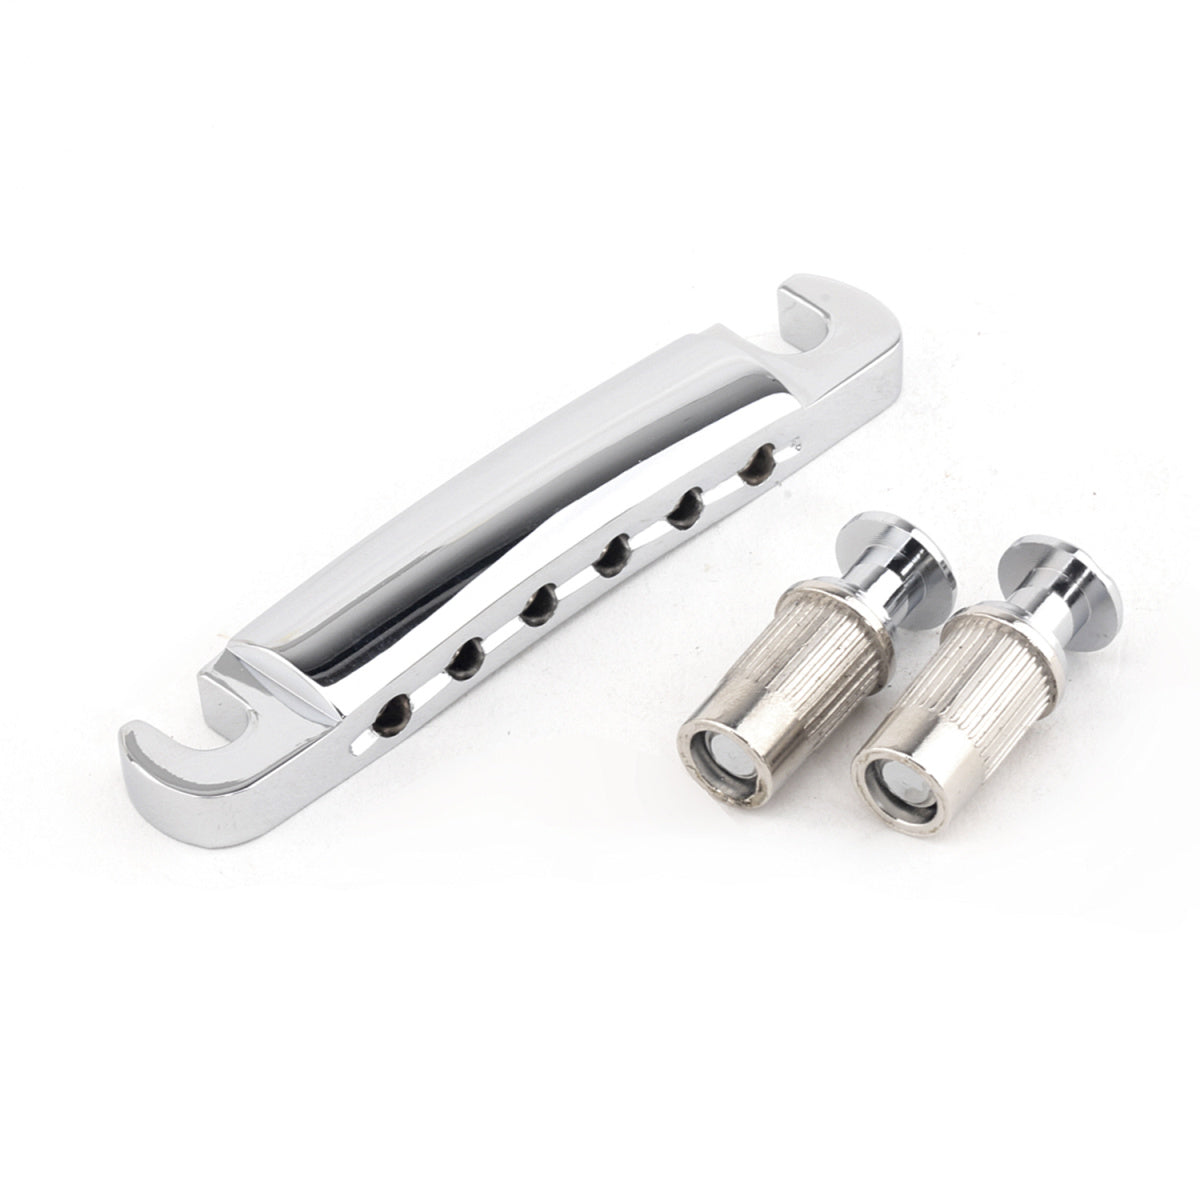 Musiclily Pro 52.5mm TOM Tunematic Tailpiece for China made Epiphone Les Paul Guitar Replacement, Chrome